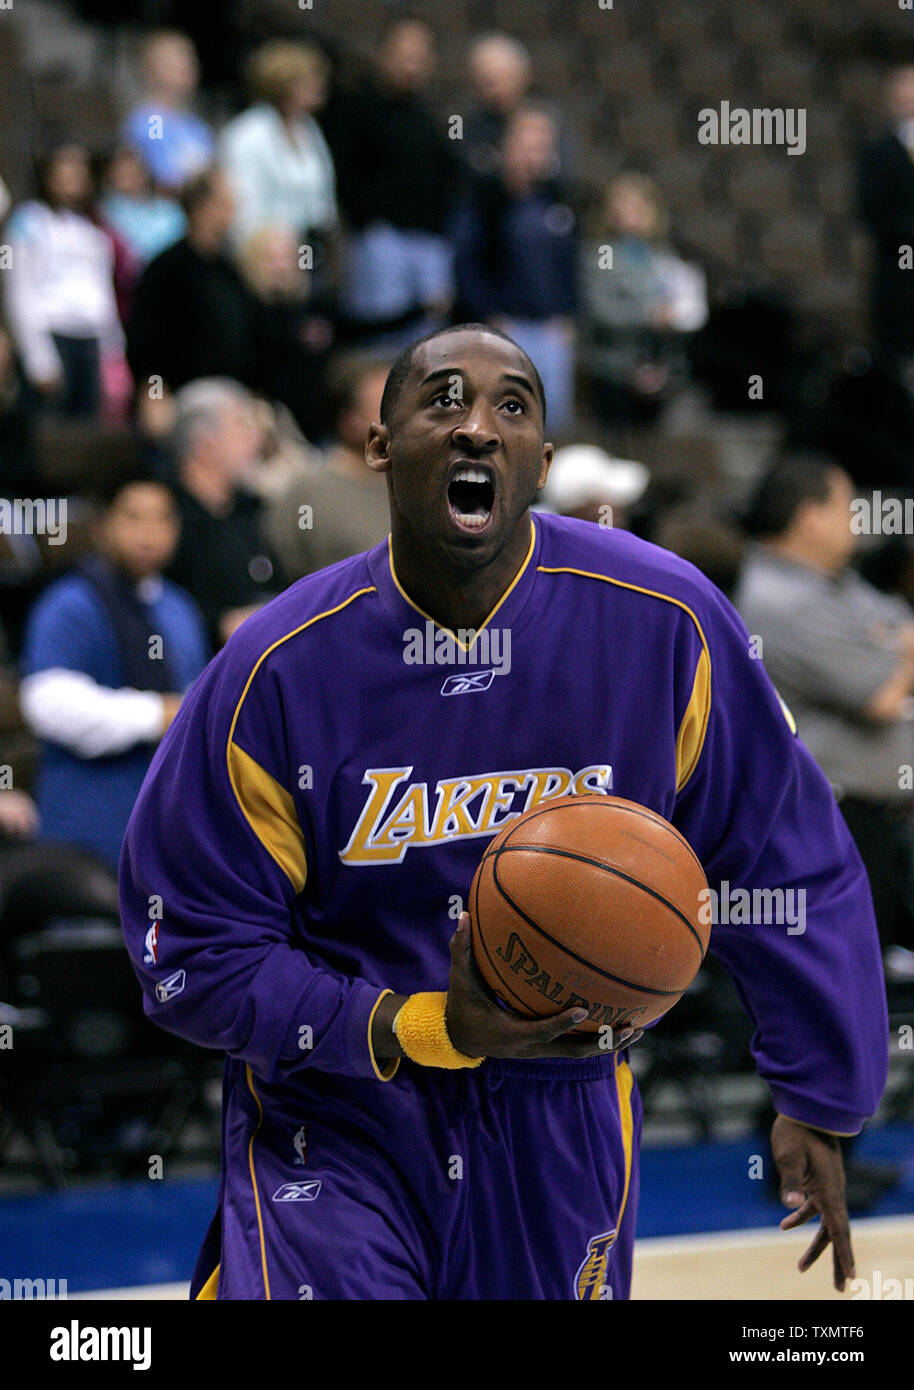 Los Angeles Lakers Kobe Bryant eyes a layup during pre-game warmups prior to season opener against the Denver Nuggets at the Pepsi Center in Denver November 2, 2005.   (UPI Photo/Gary C. Caskey) Stock Photo